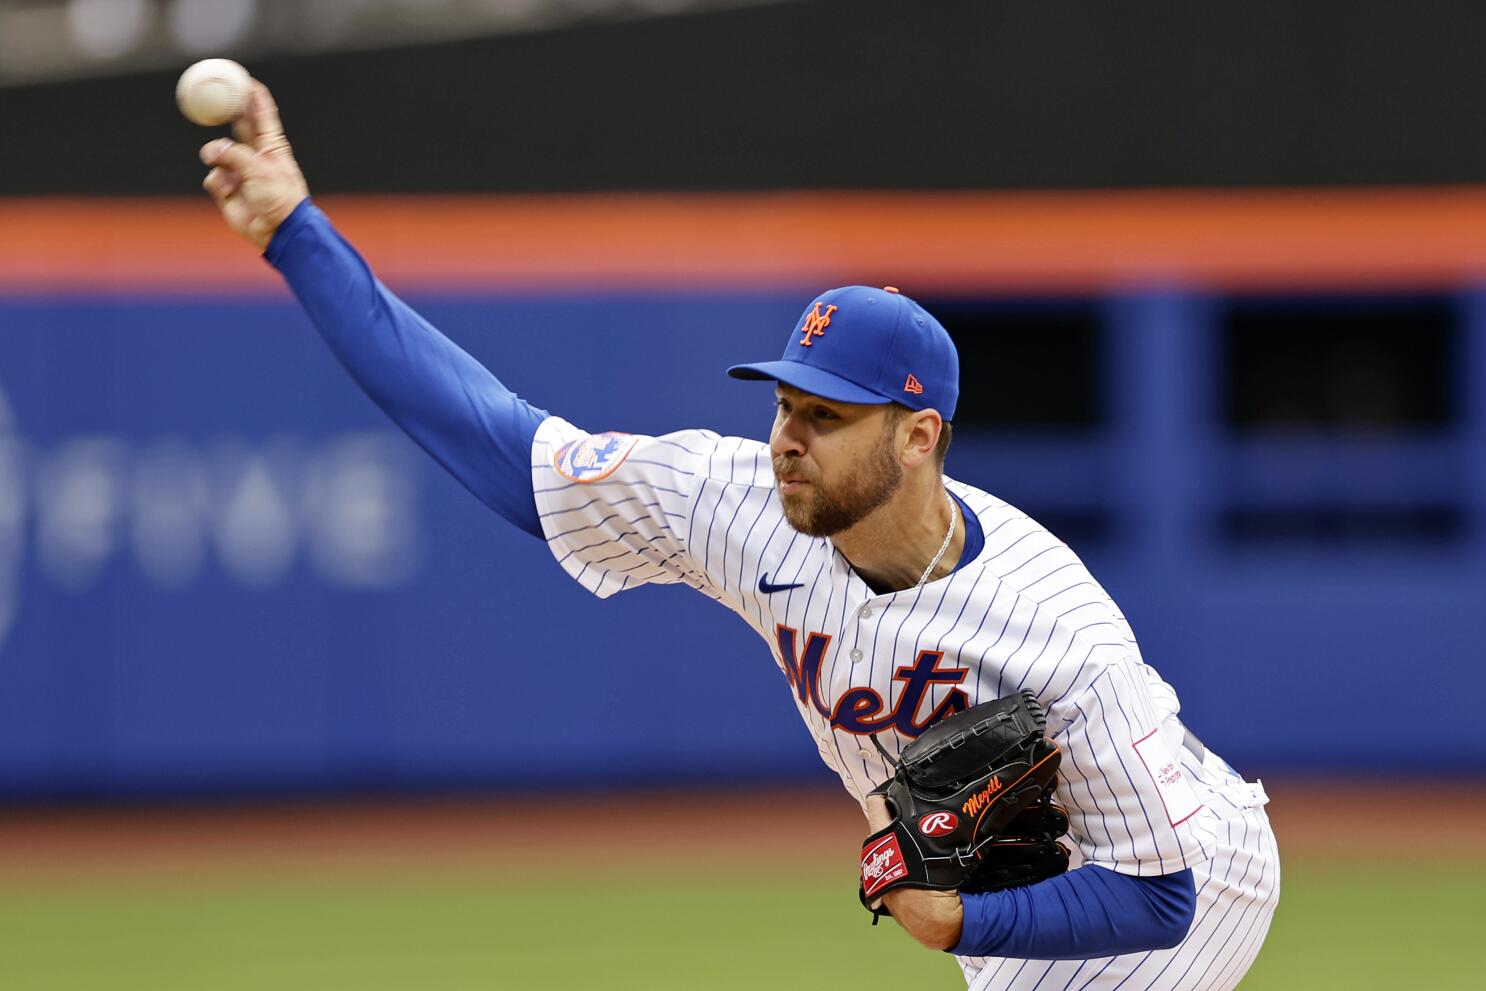 Mets walk to 9-3 win over Marlins in home opener - The San Diego